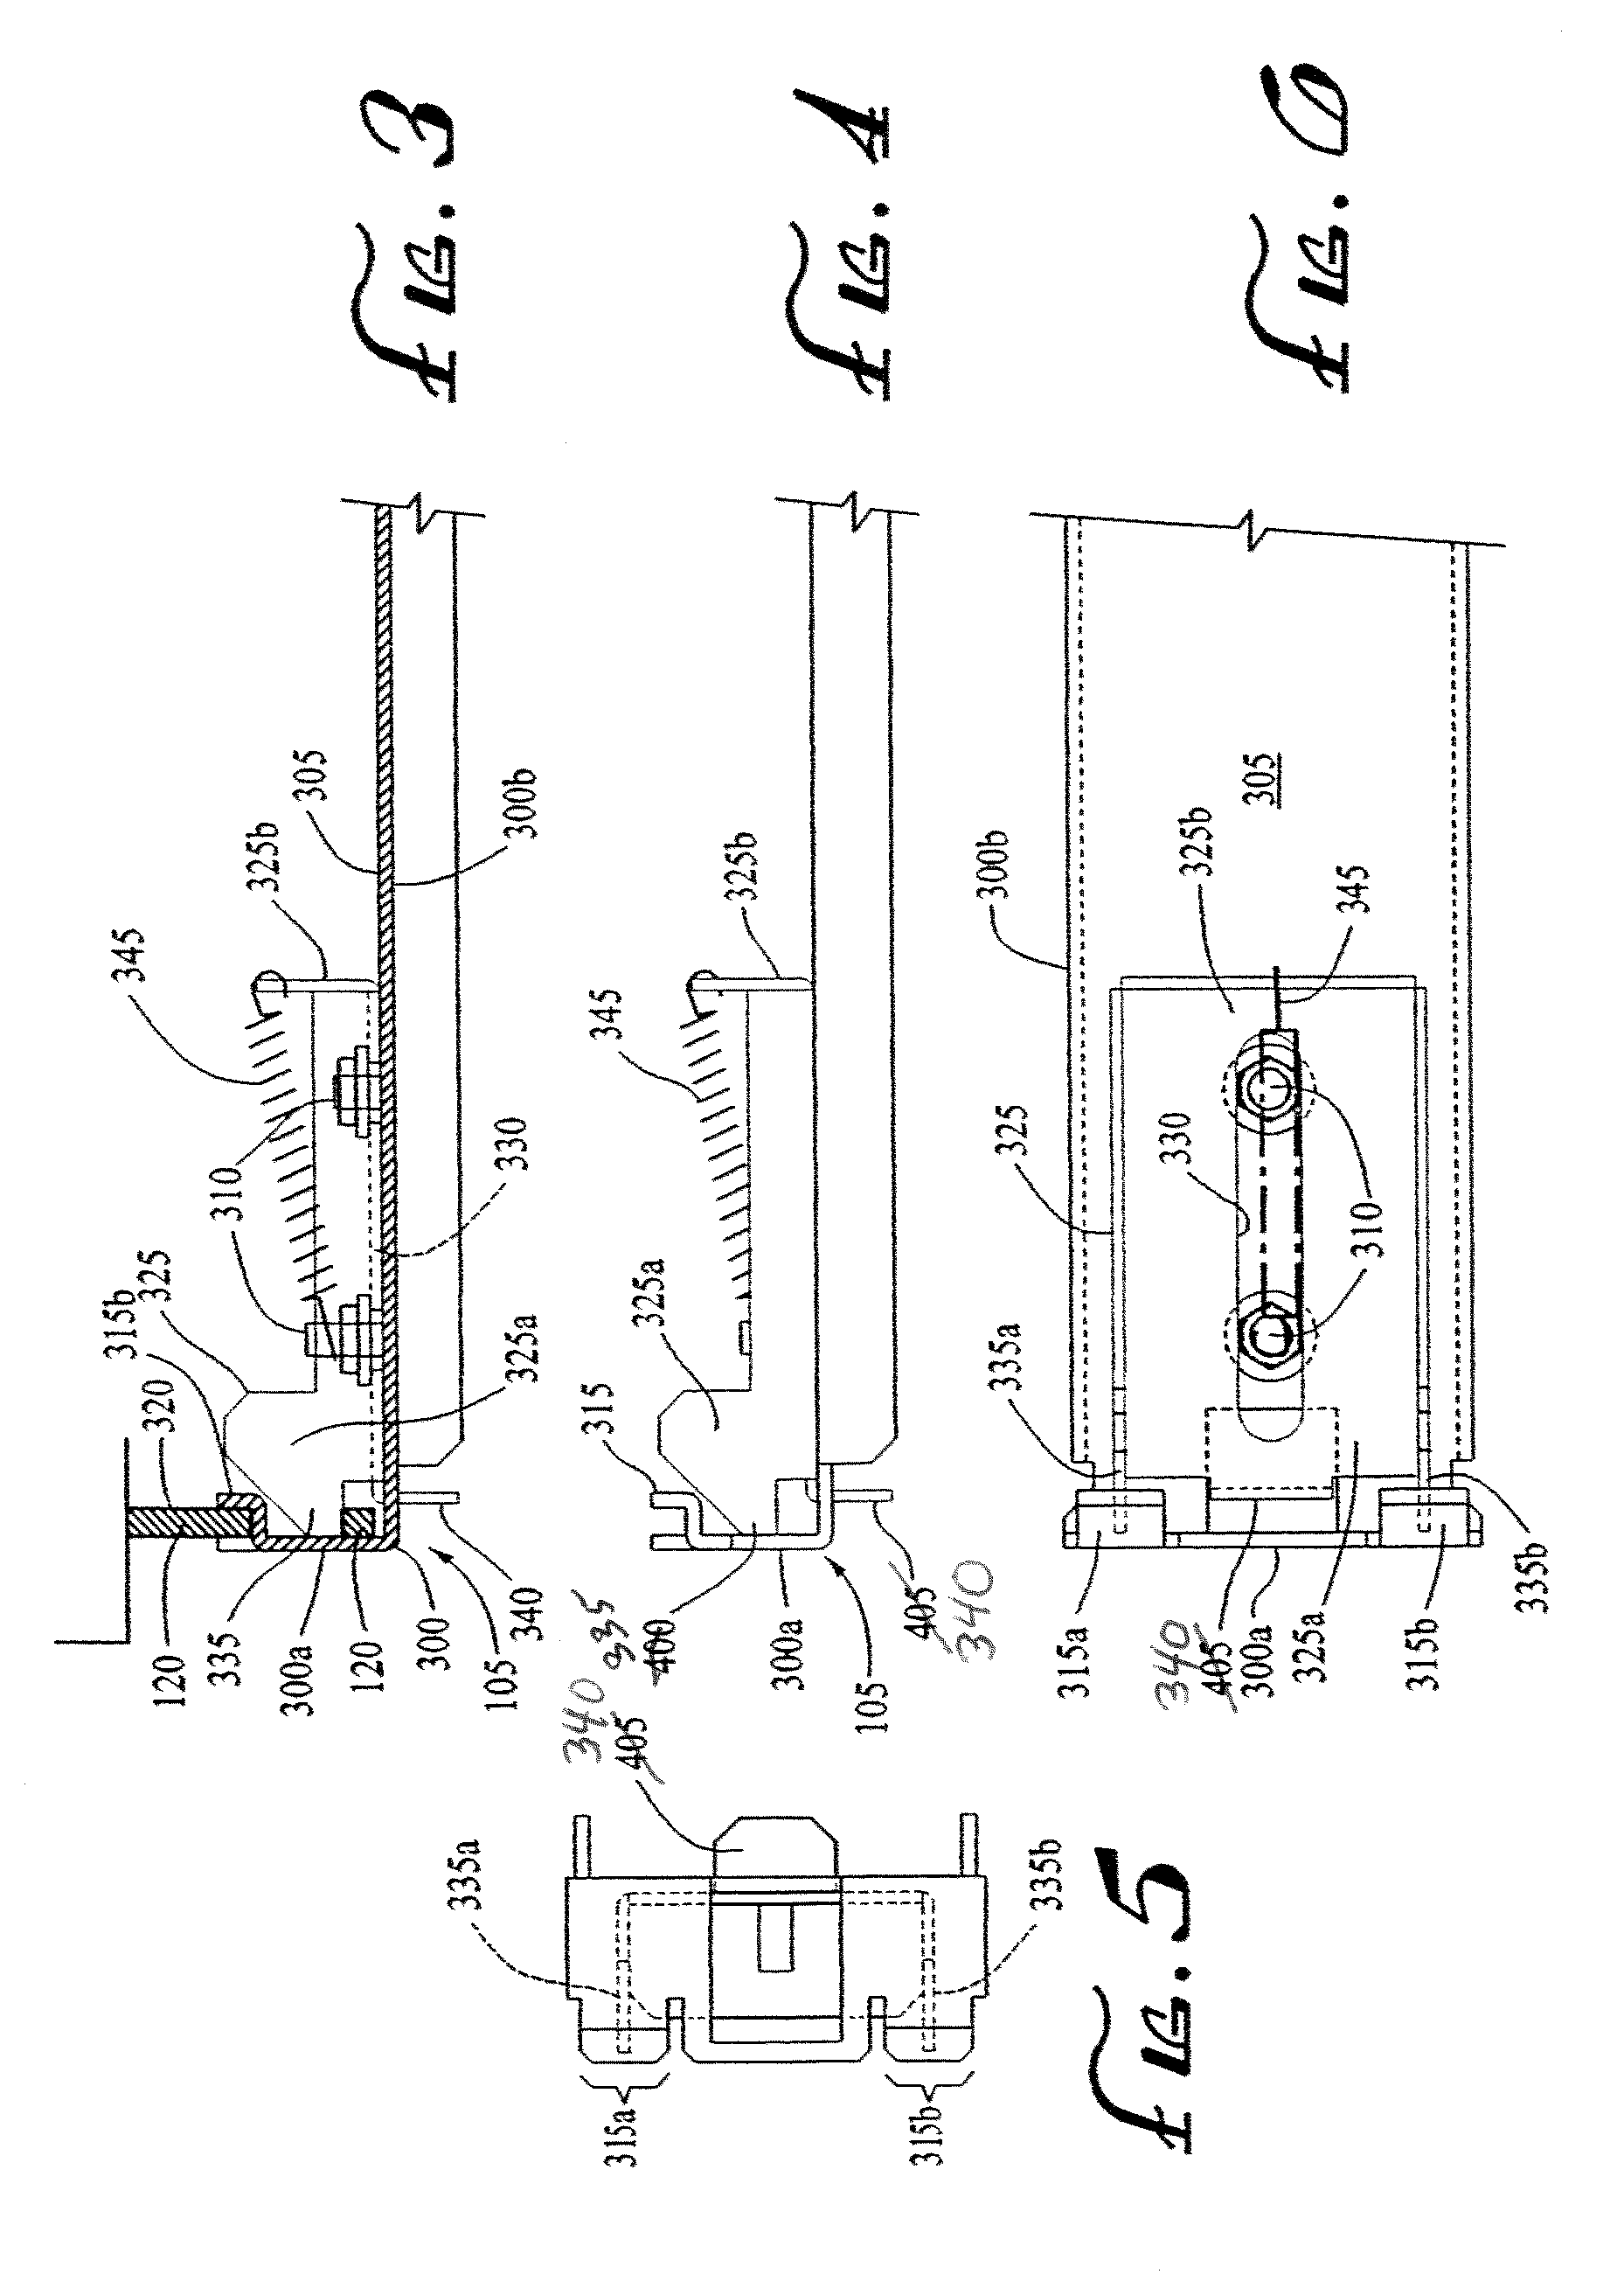 Spring loaded bracket assembly having a tool-less attachment and removal feature